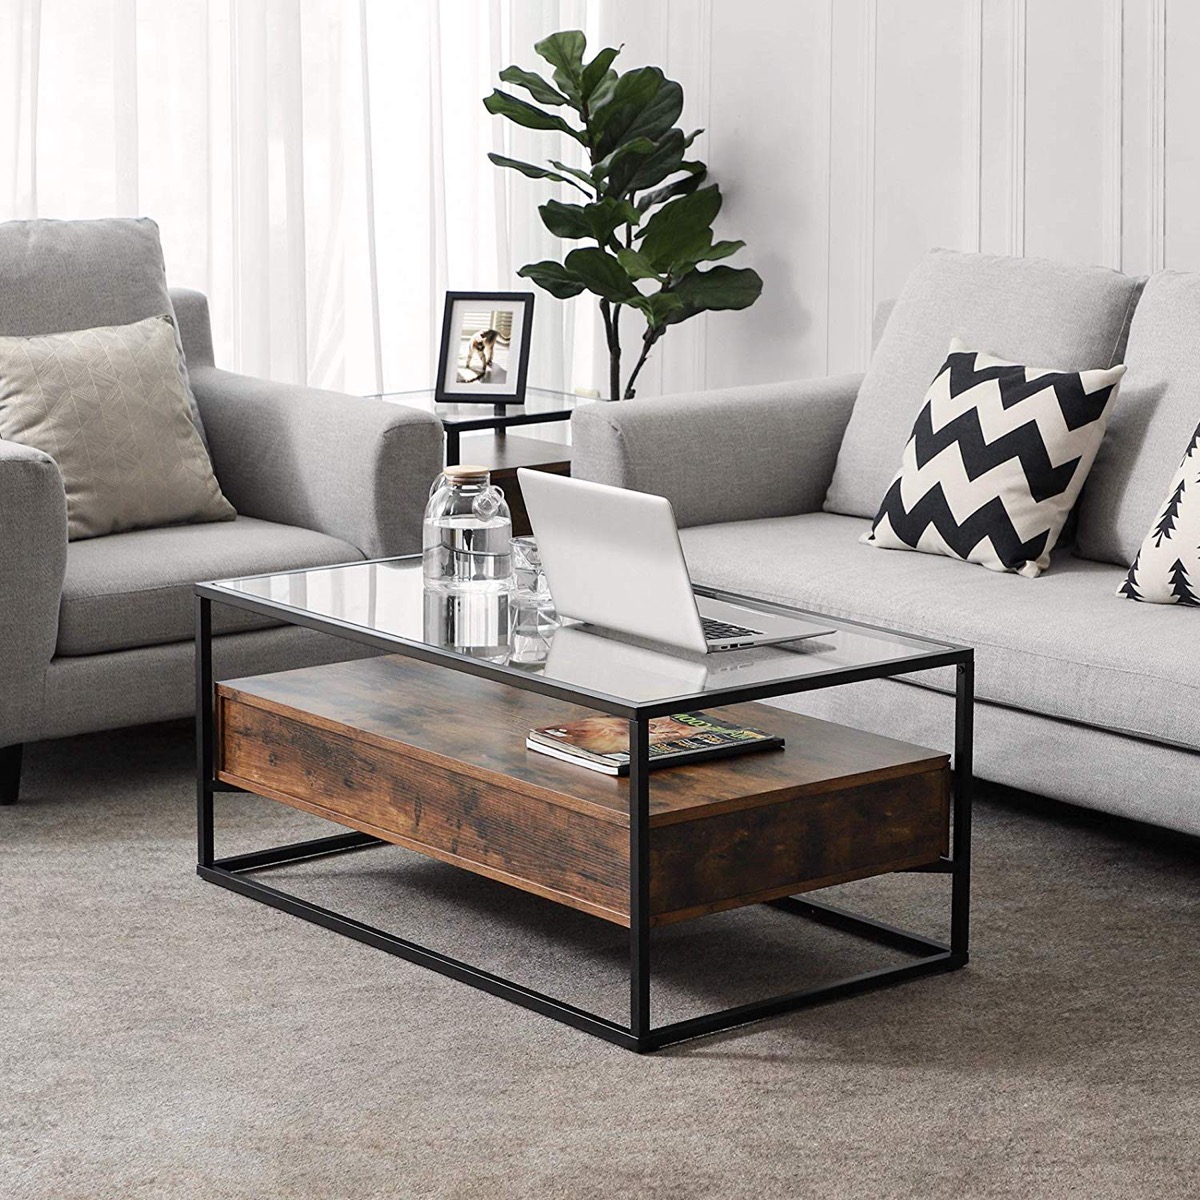 Rustic Industrial Glass Coffee Table With Walnut Wood Floating Shelf 